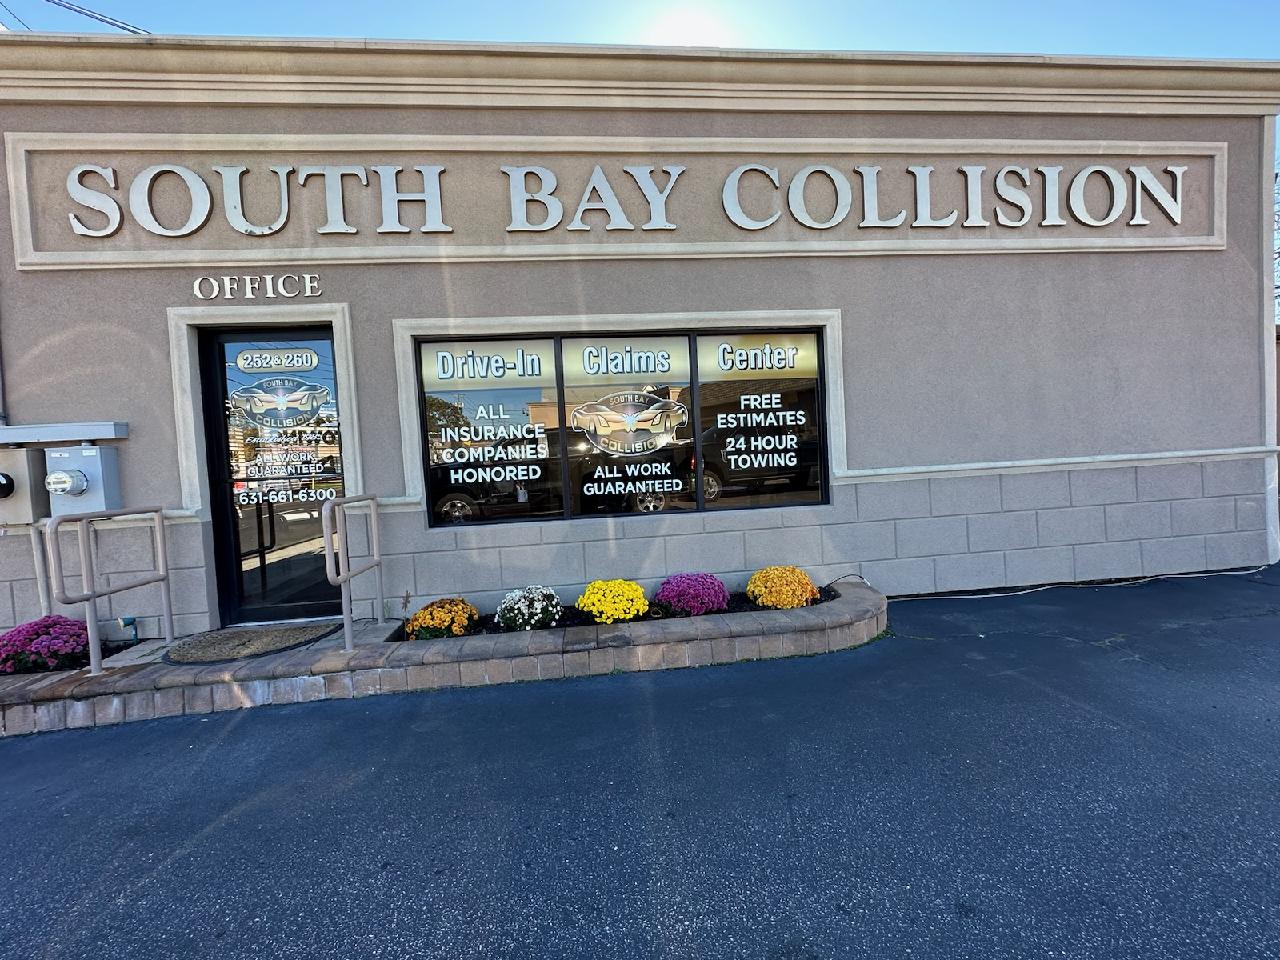 Auto body and collision shop located in West Babylon, NY serving Long Island